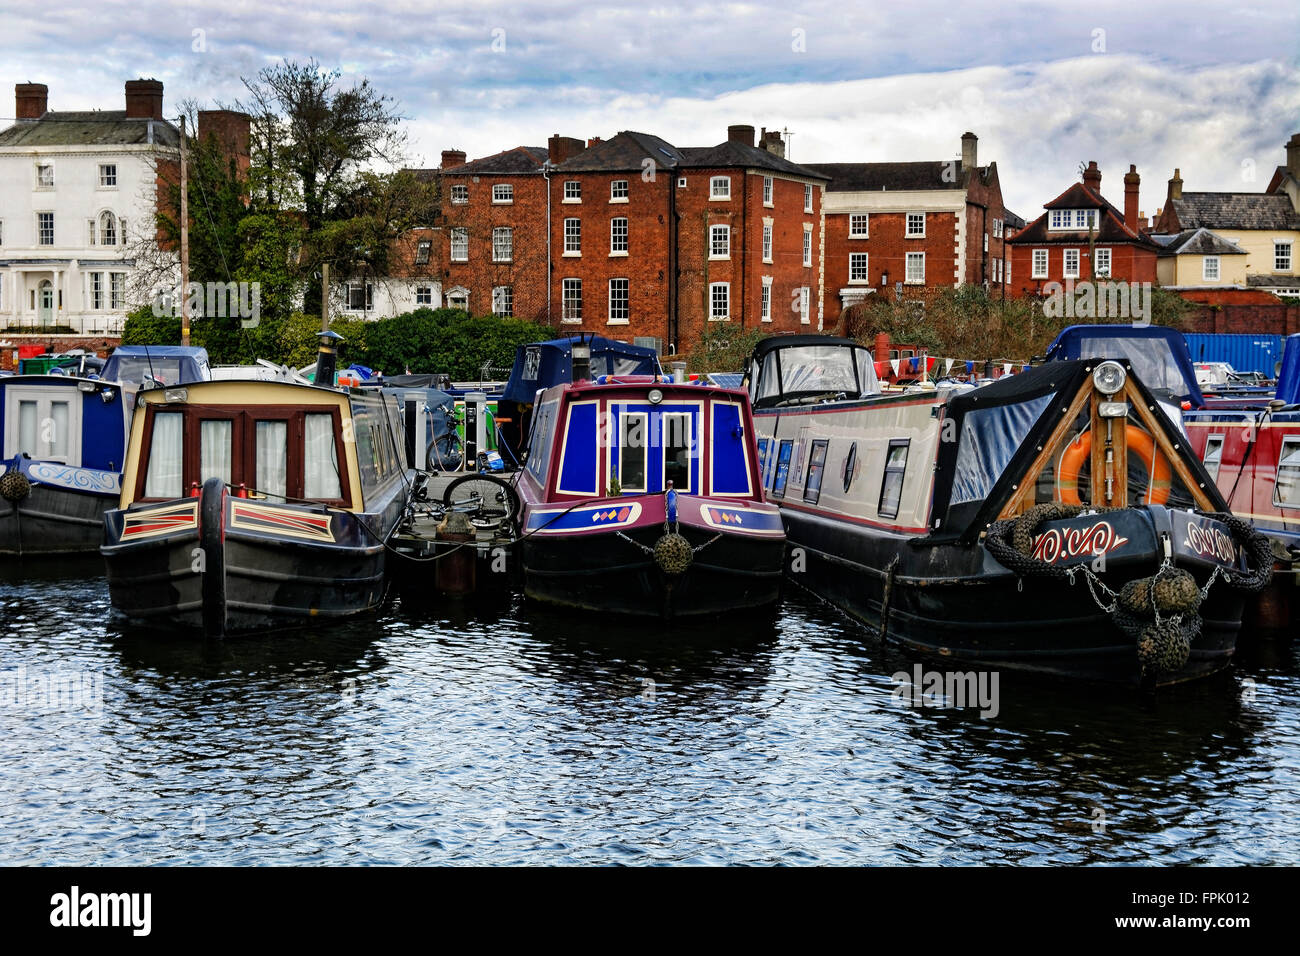 A winter respite for moored barges and canal boats at rest at Stourport upon Severn canal basin and port harbour Stock Photo